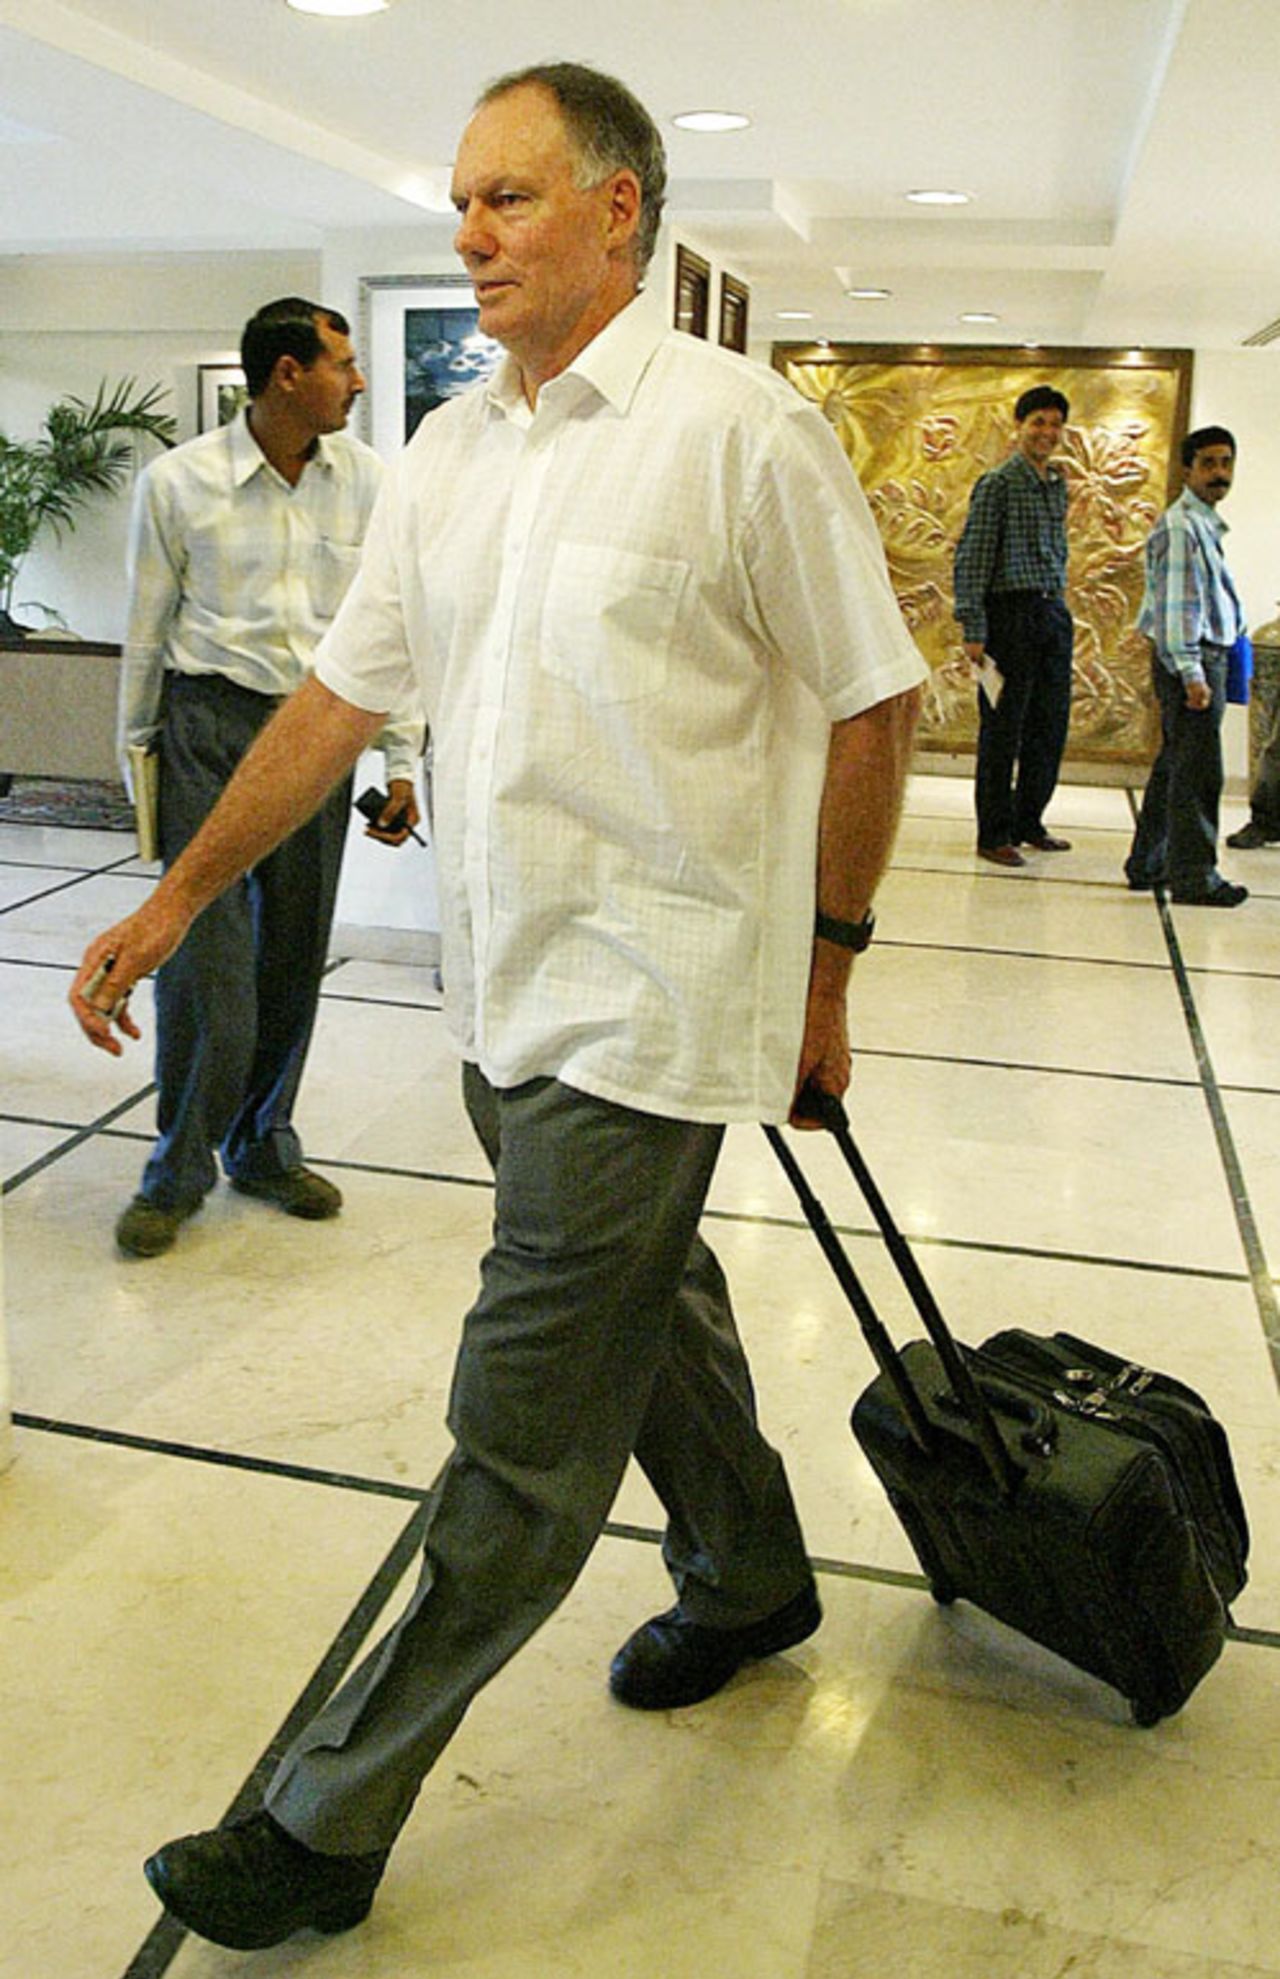 Greg Chappell, India's coach, leaves the team hotel , Chandigarh, October 30, 2006